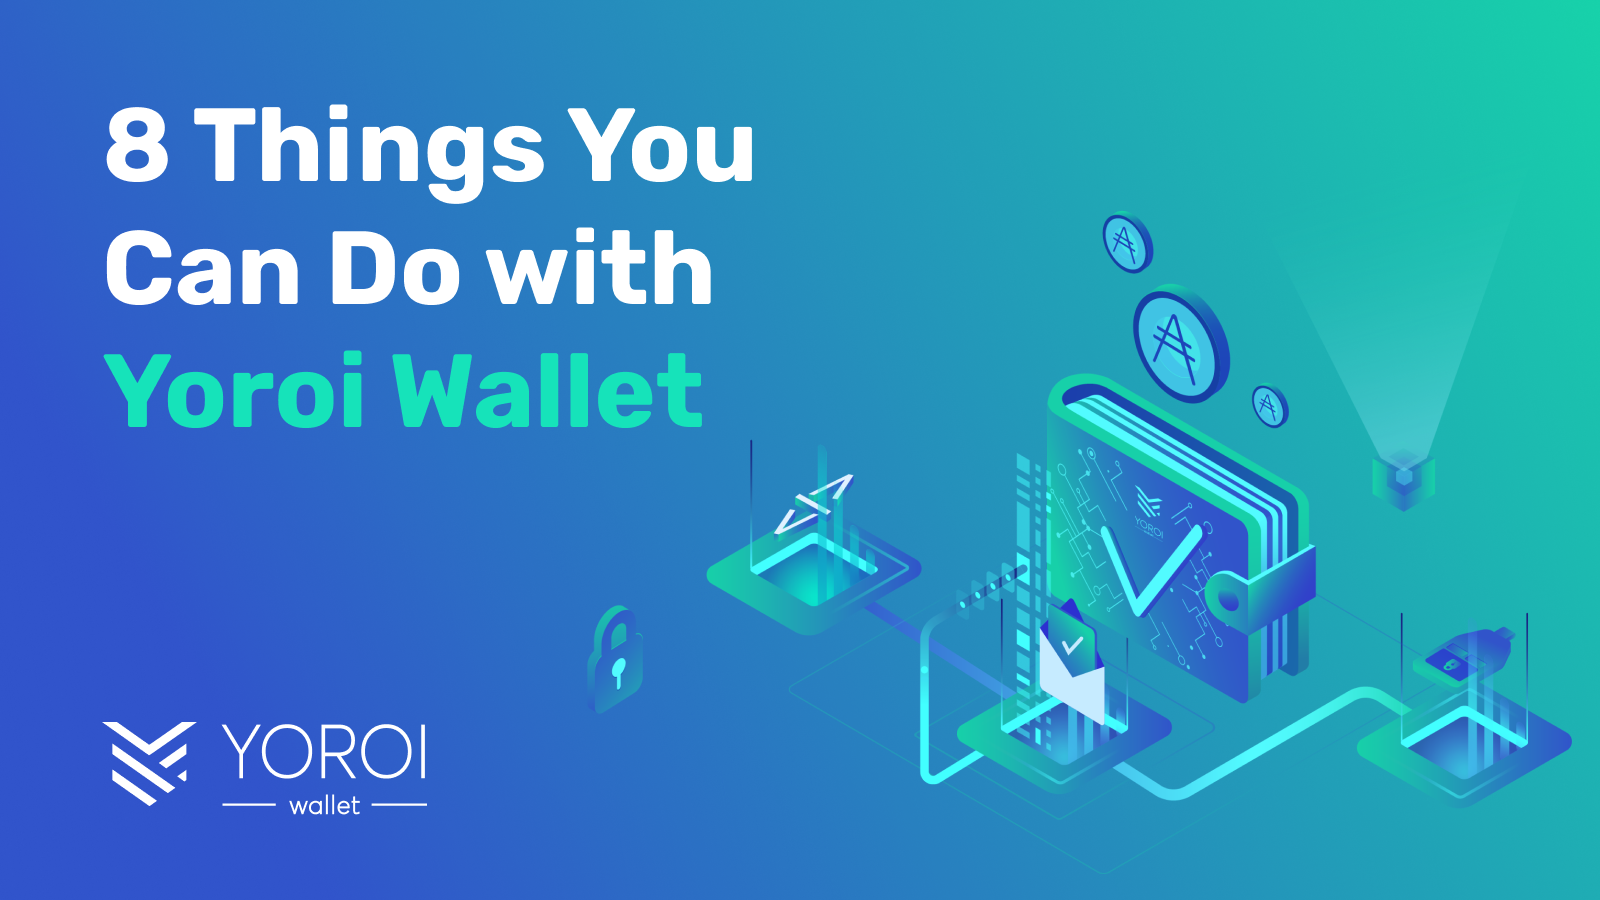 8-Things-You-Can-Do-With-Yoroi-Wallet-Cardano-Blockchain.png